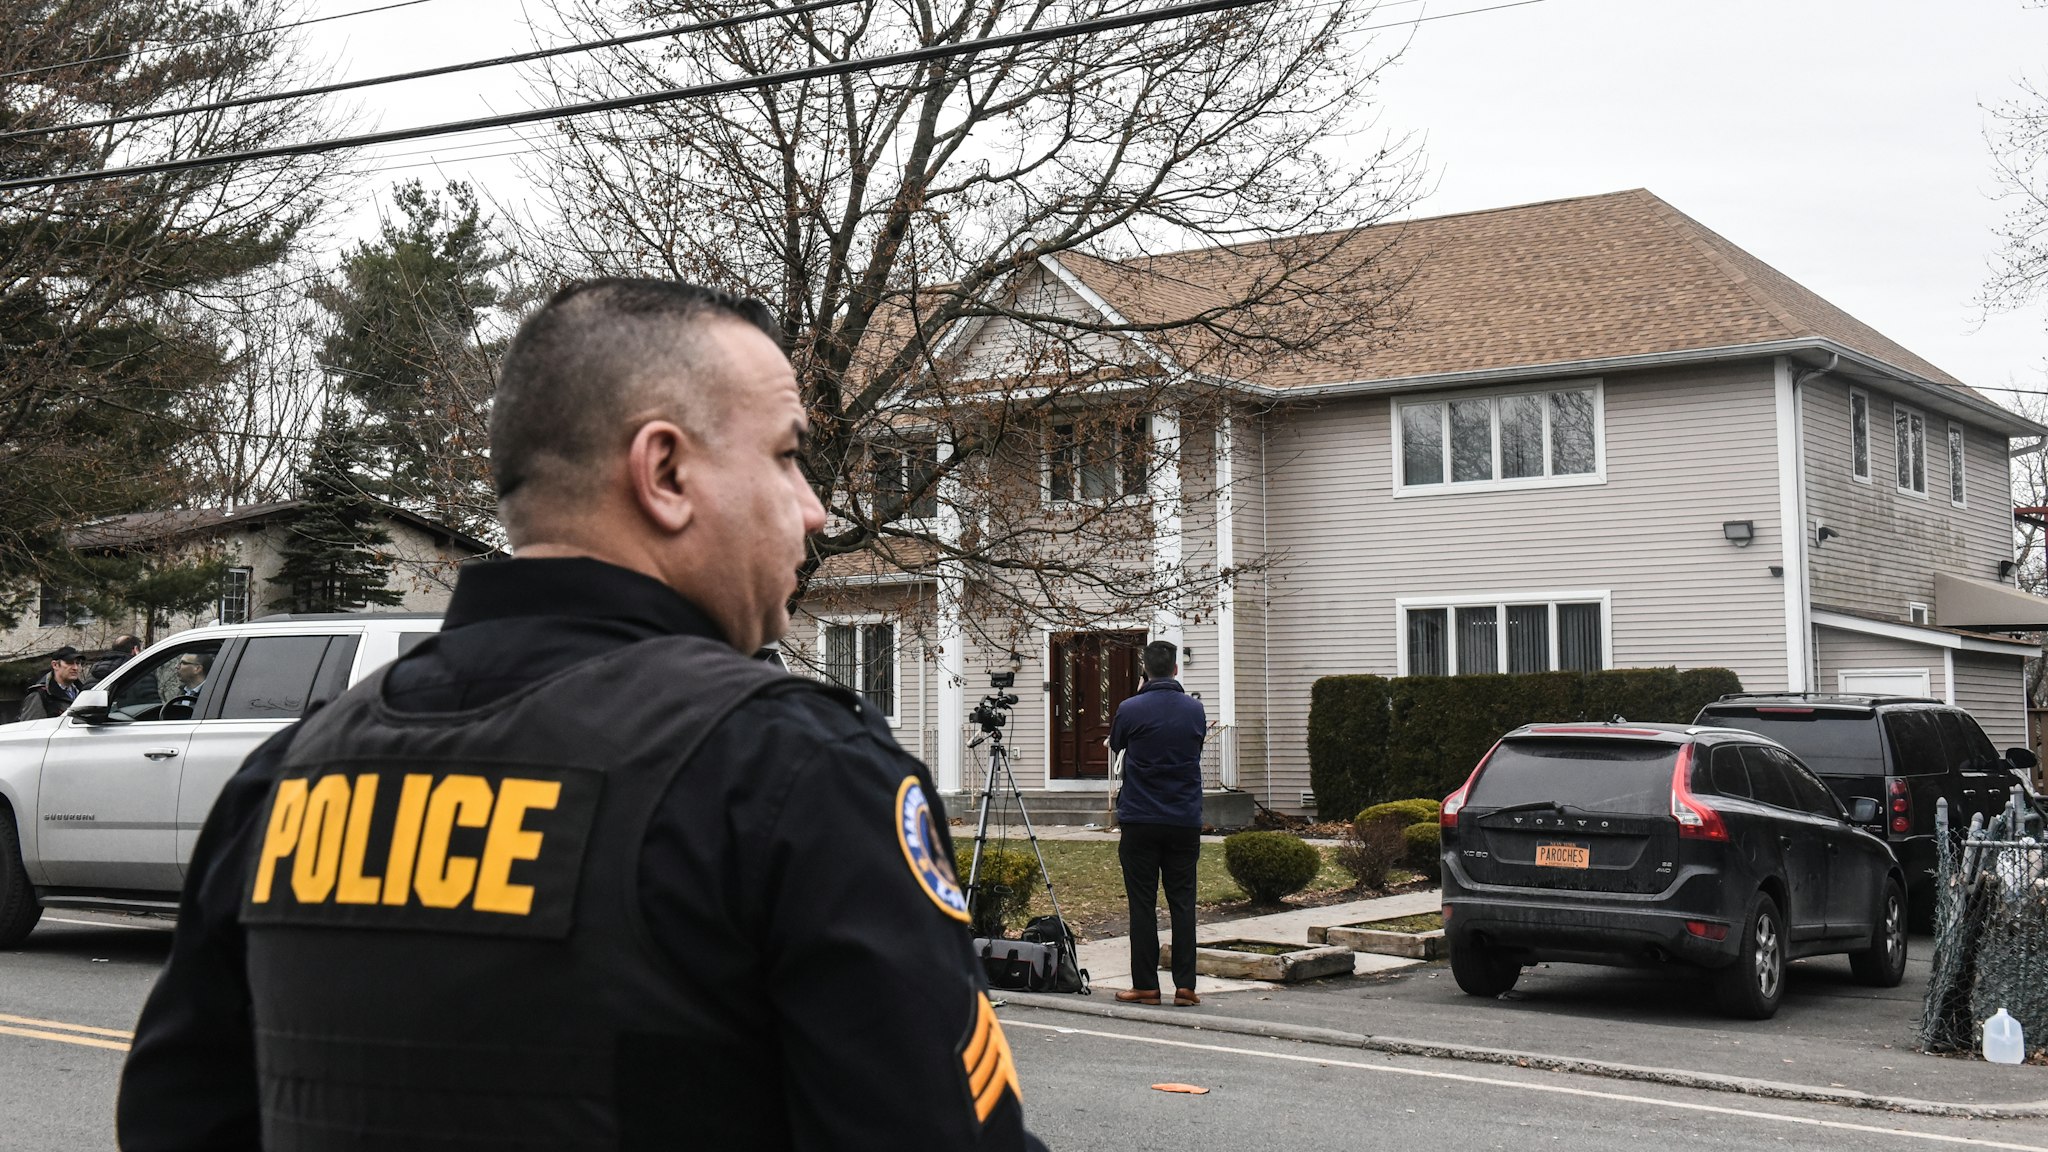 MONSEY, NY - DECEMBER 29: A member of the Ramapo police stands guard in front of the house of Rabbi Chaim Rottenberg on December 29, 2019 in Monsey, New York. Five people were injured in a knife attack during a Hanukkah party and a suspect, identified as Grafton E. Thomas, as was later arrested in Harlem.